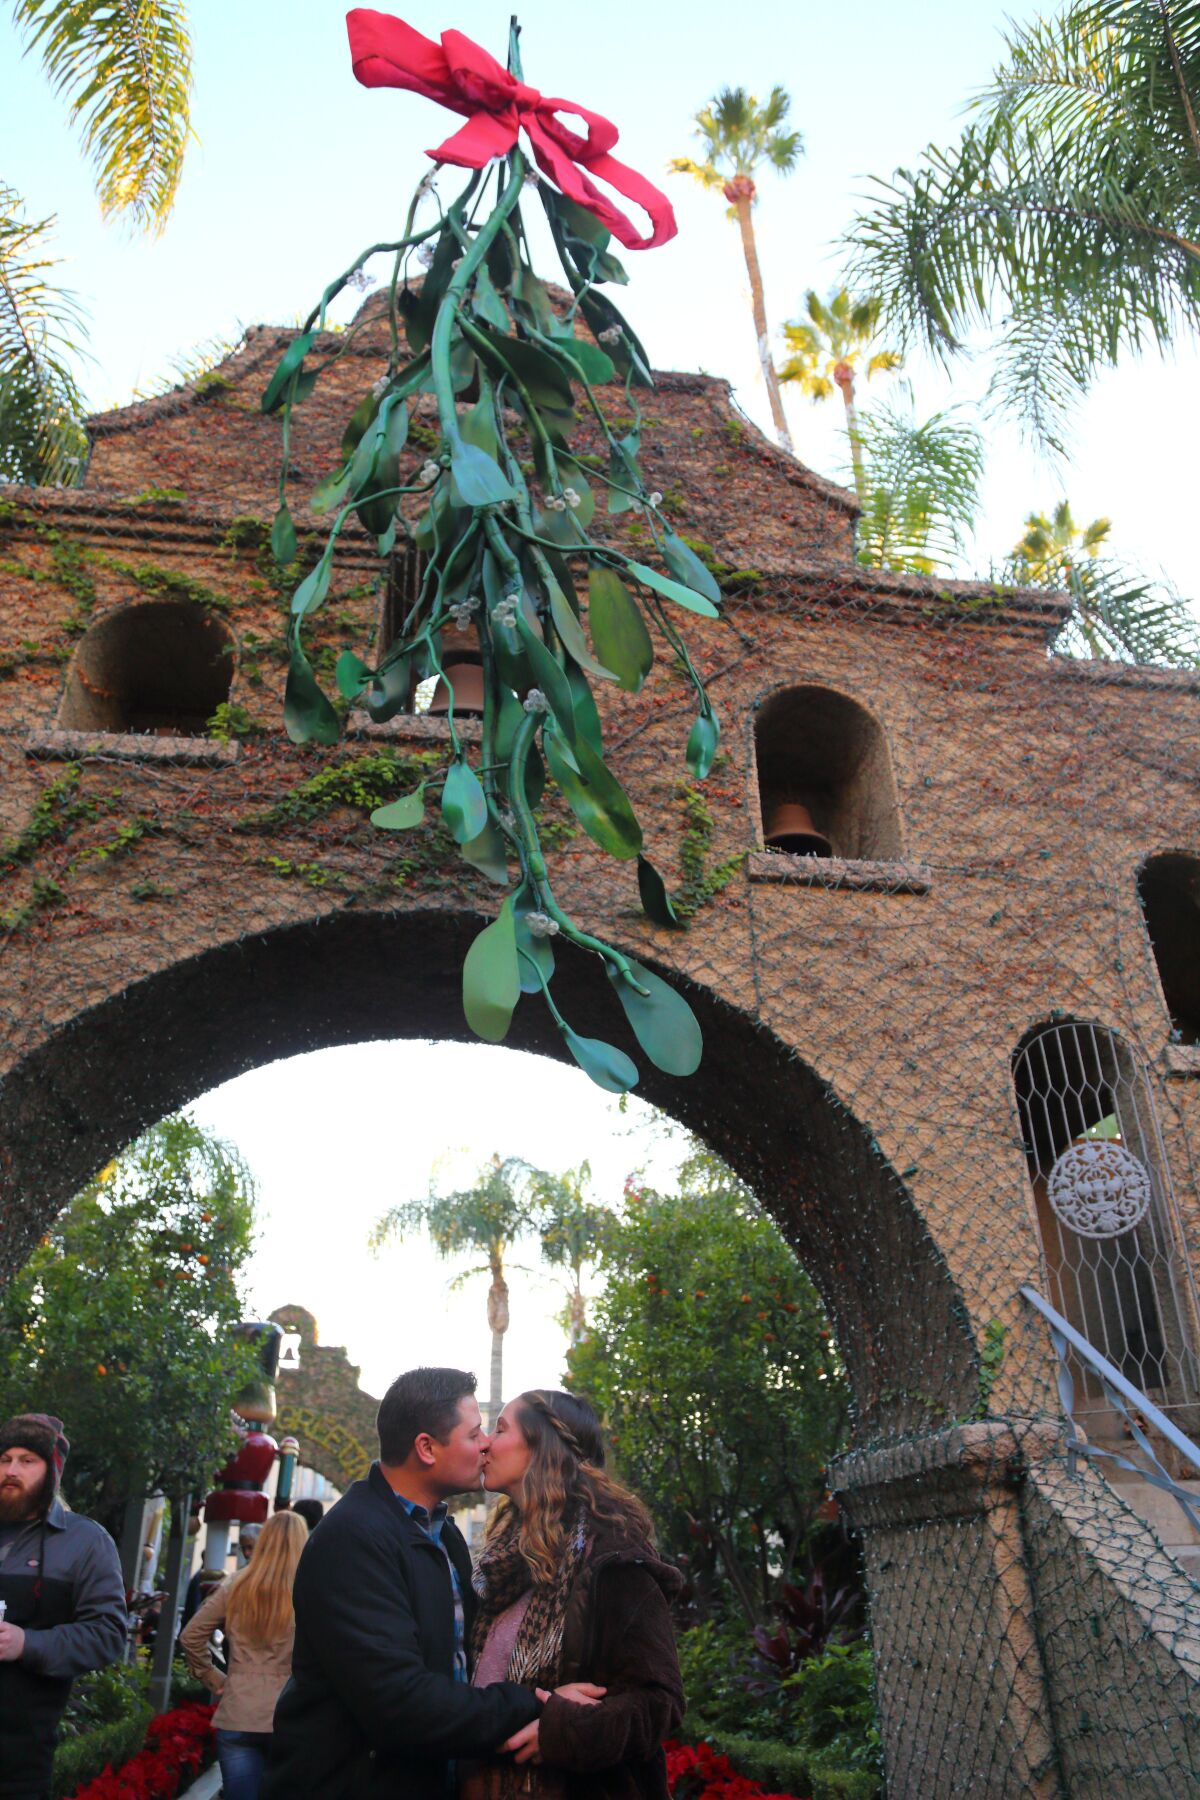 The Riverside Mission Inn Hotel & Spa's 27th Festival of Lights features the "world's largest man-made 'sprig' of mistletoe," perhaps for people who can't otherwise take the hint?